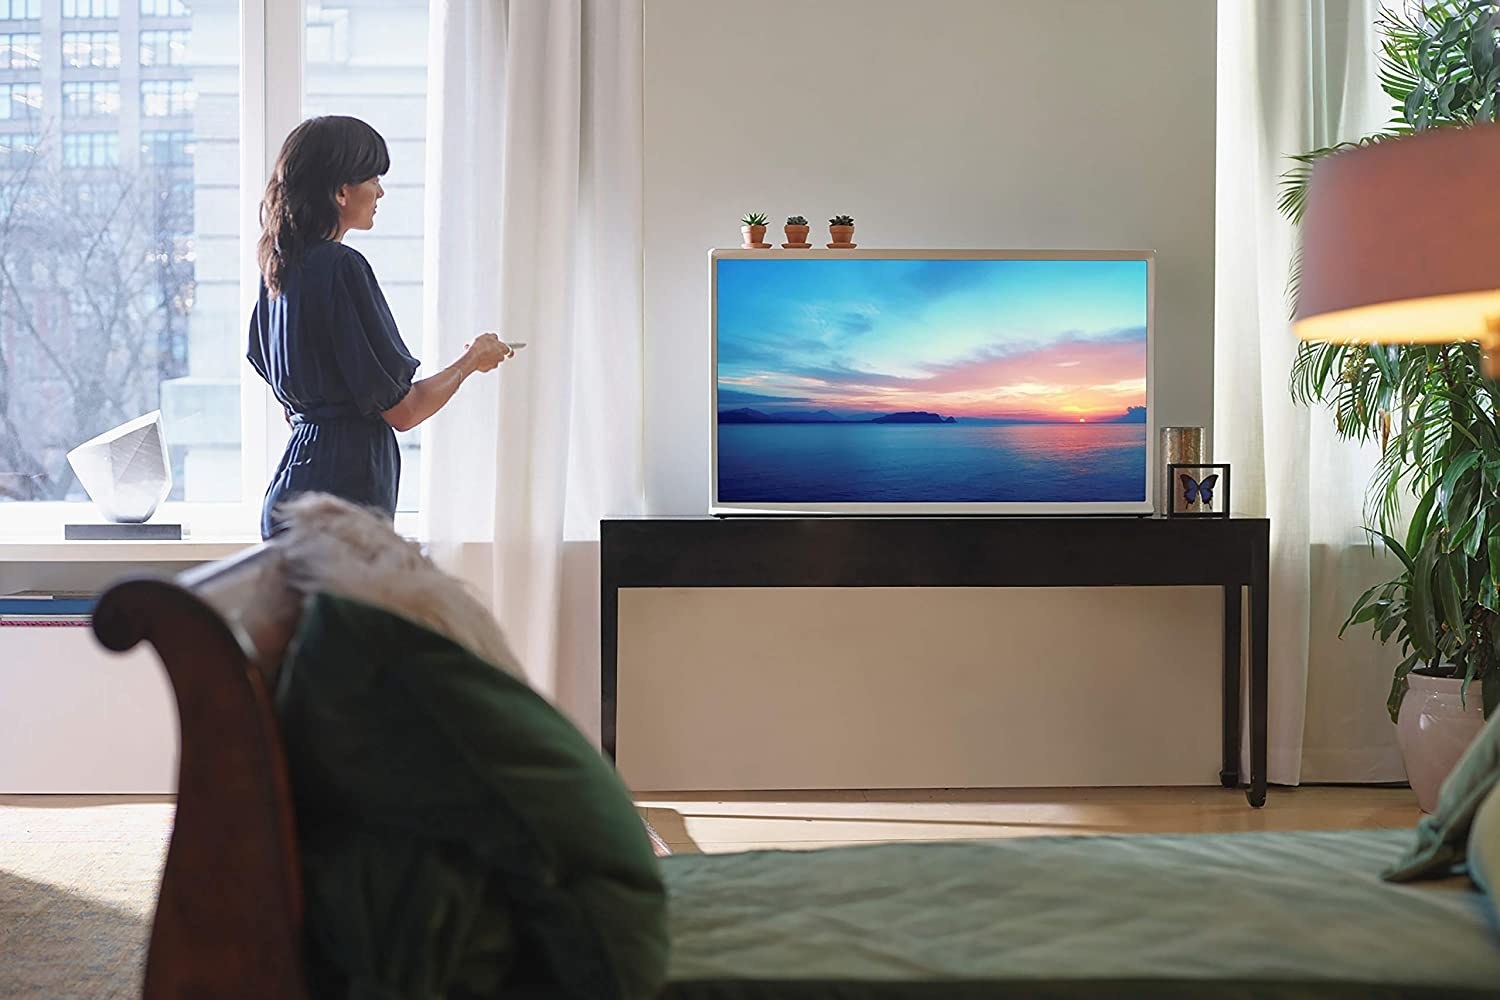 Samsung smart TV with a woman standing in front of it